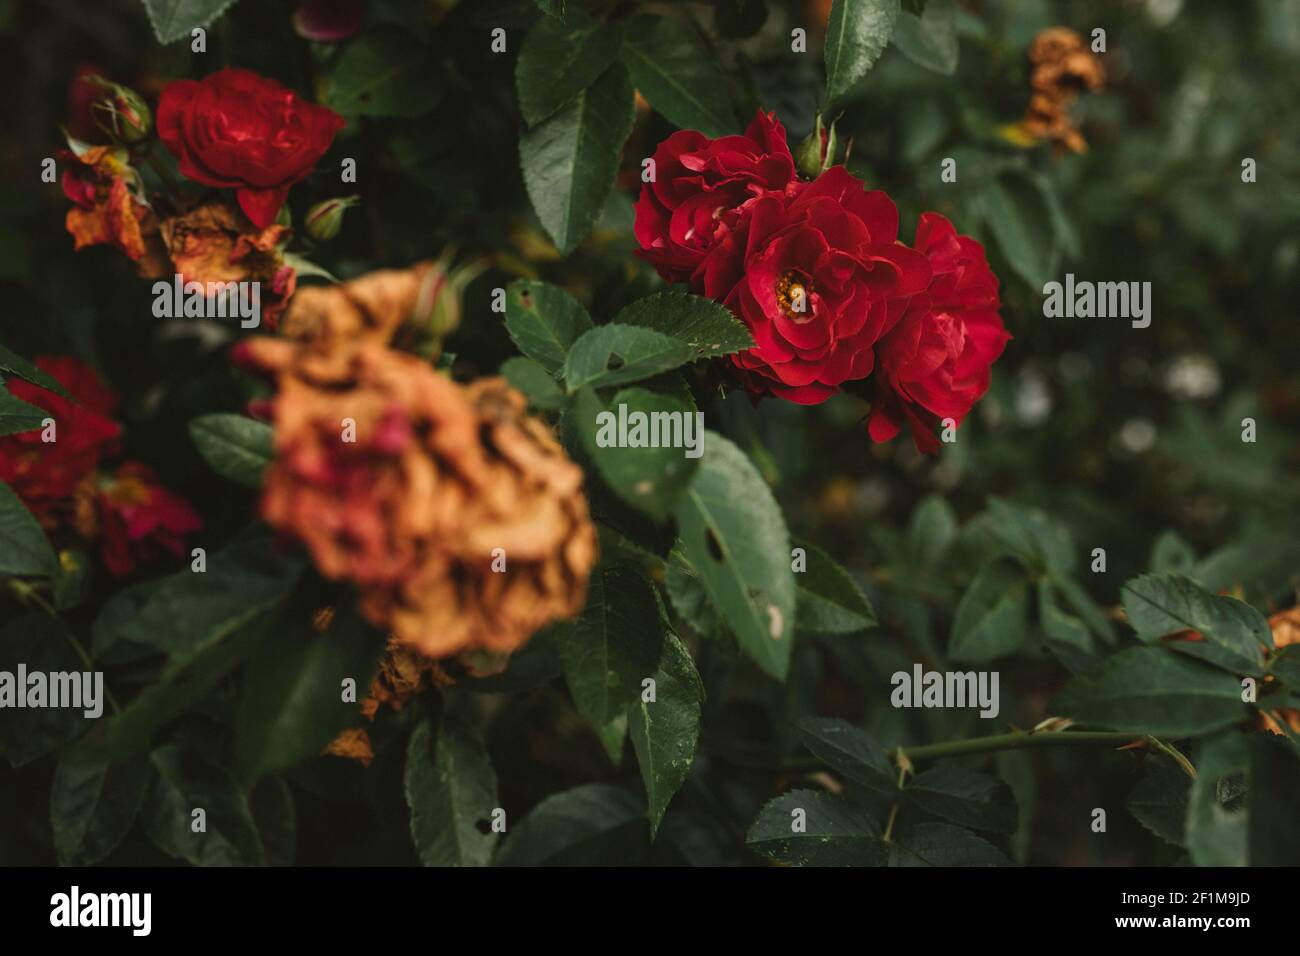 Flowering red roses Stock Photo